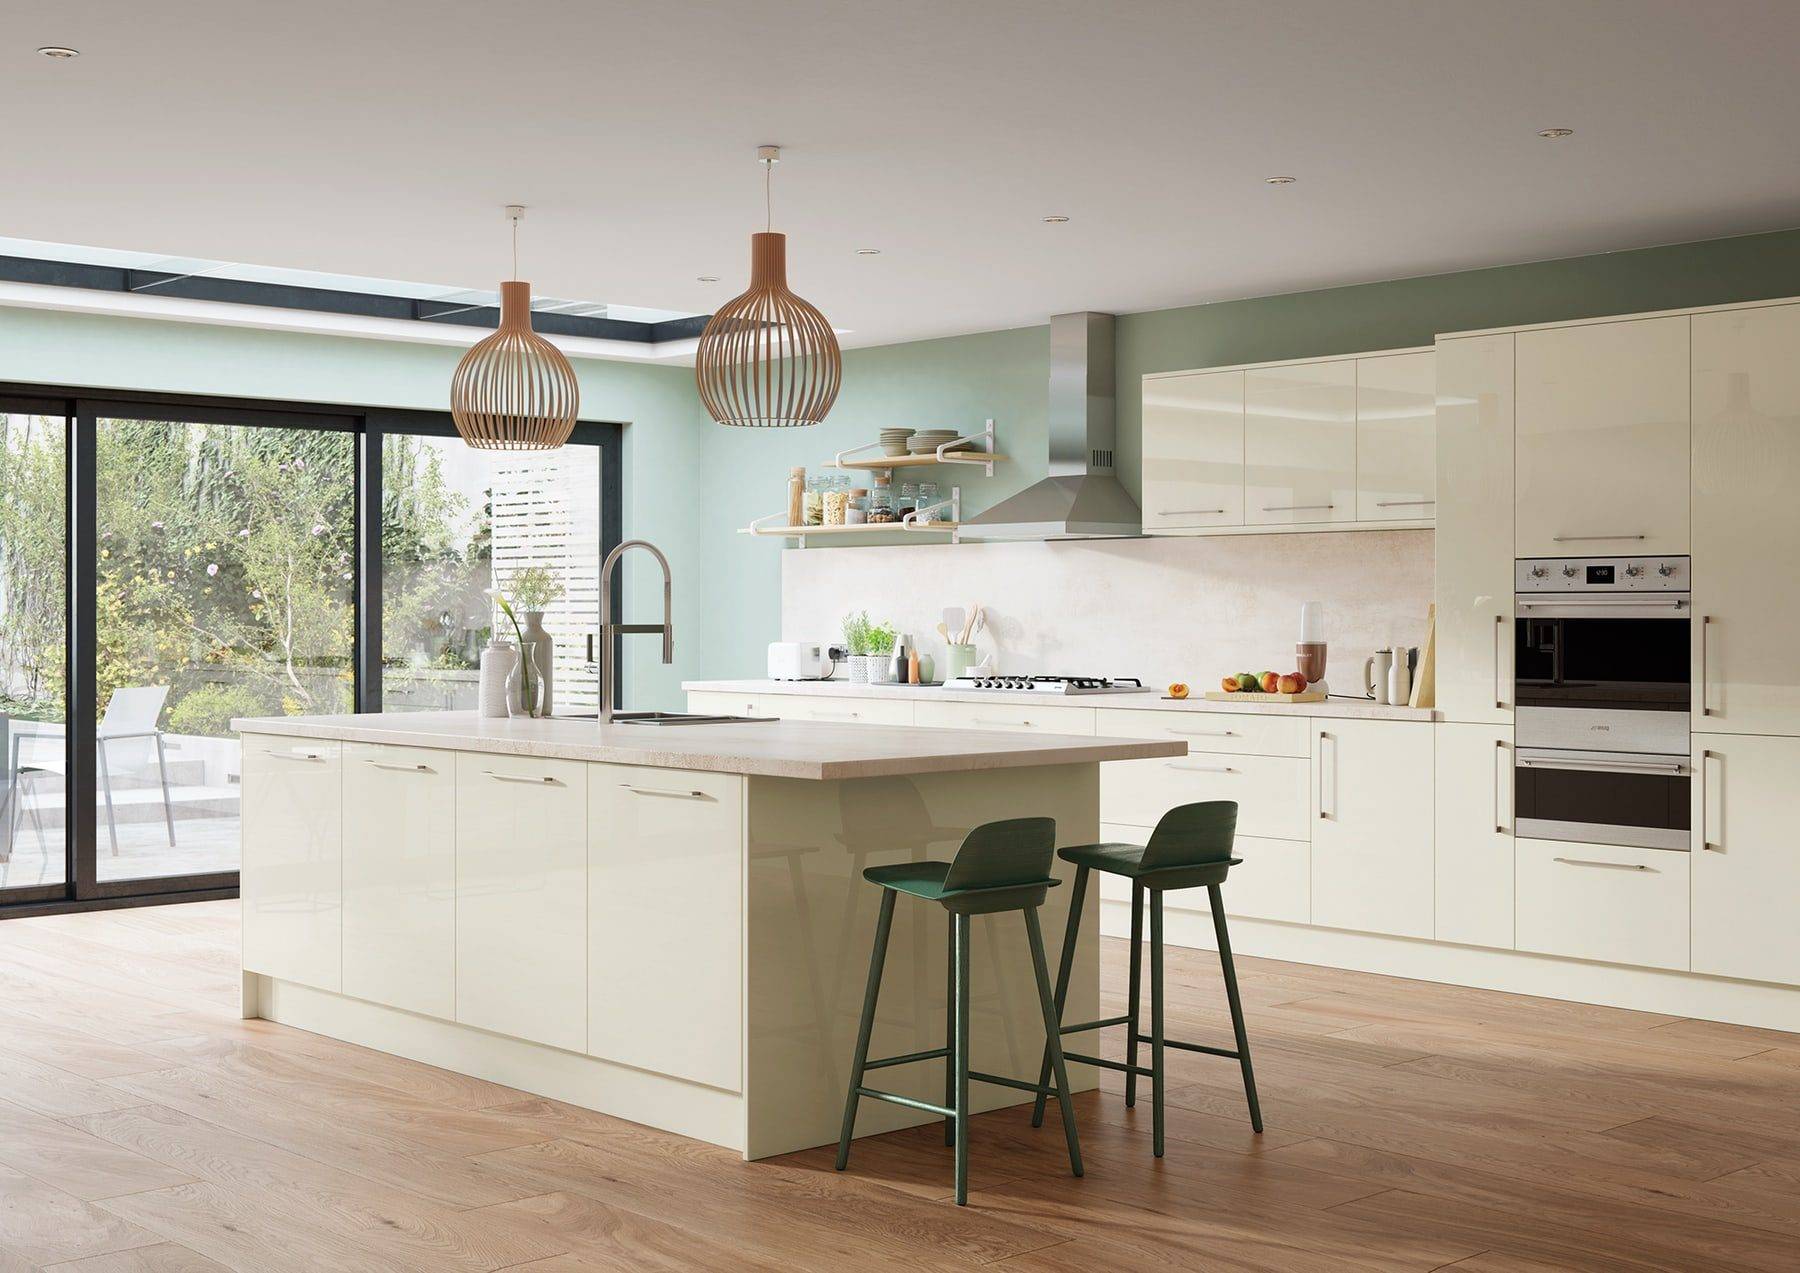 Zola Gloss Porcelain Kitchen With Island | Stanford Design, Upminster